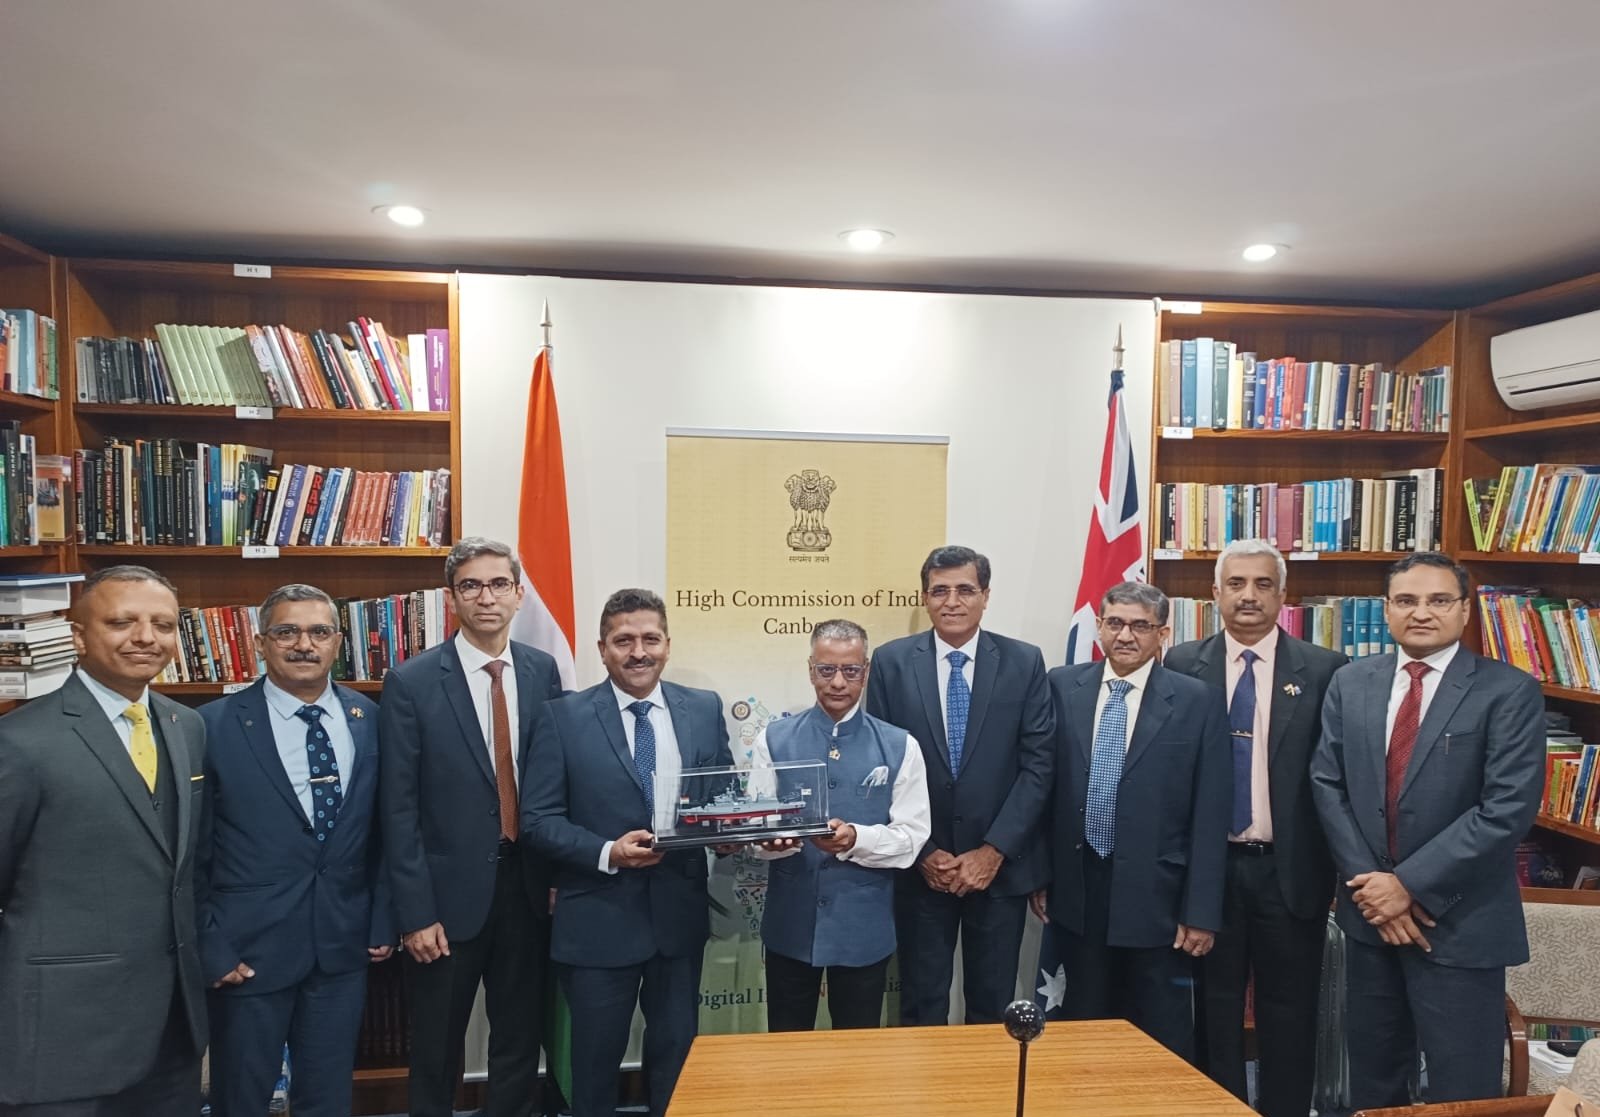 Proud Moment for GRSE to be part of a composite delegation of key Indian Shipbuilders. Exciting discussion on harnessing India's Shipbuilding Prowess & Fostering collaboration with Australia om 09 Apr 24 - Thumbnail